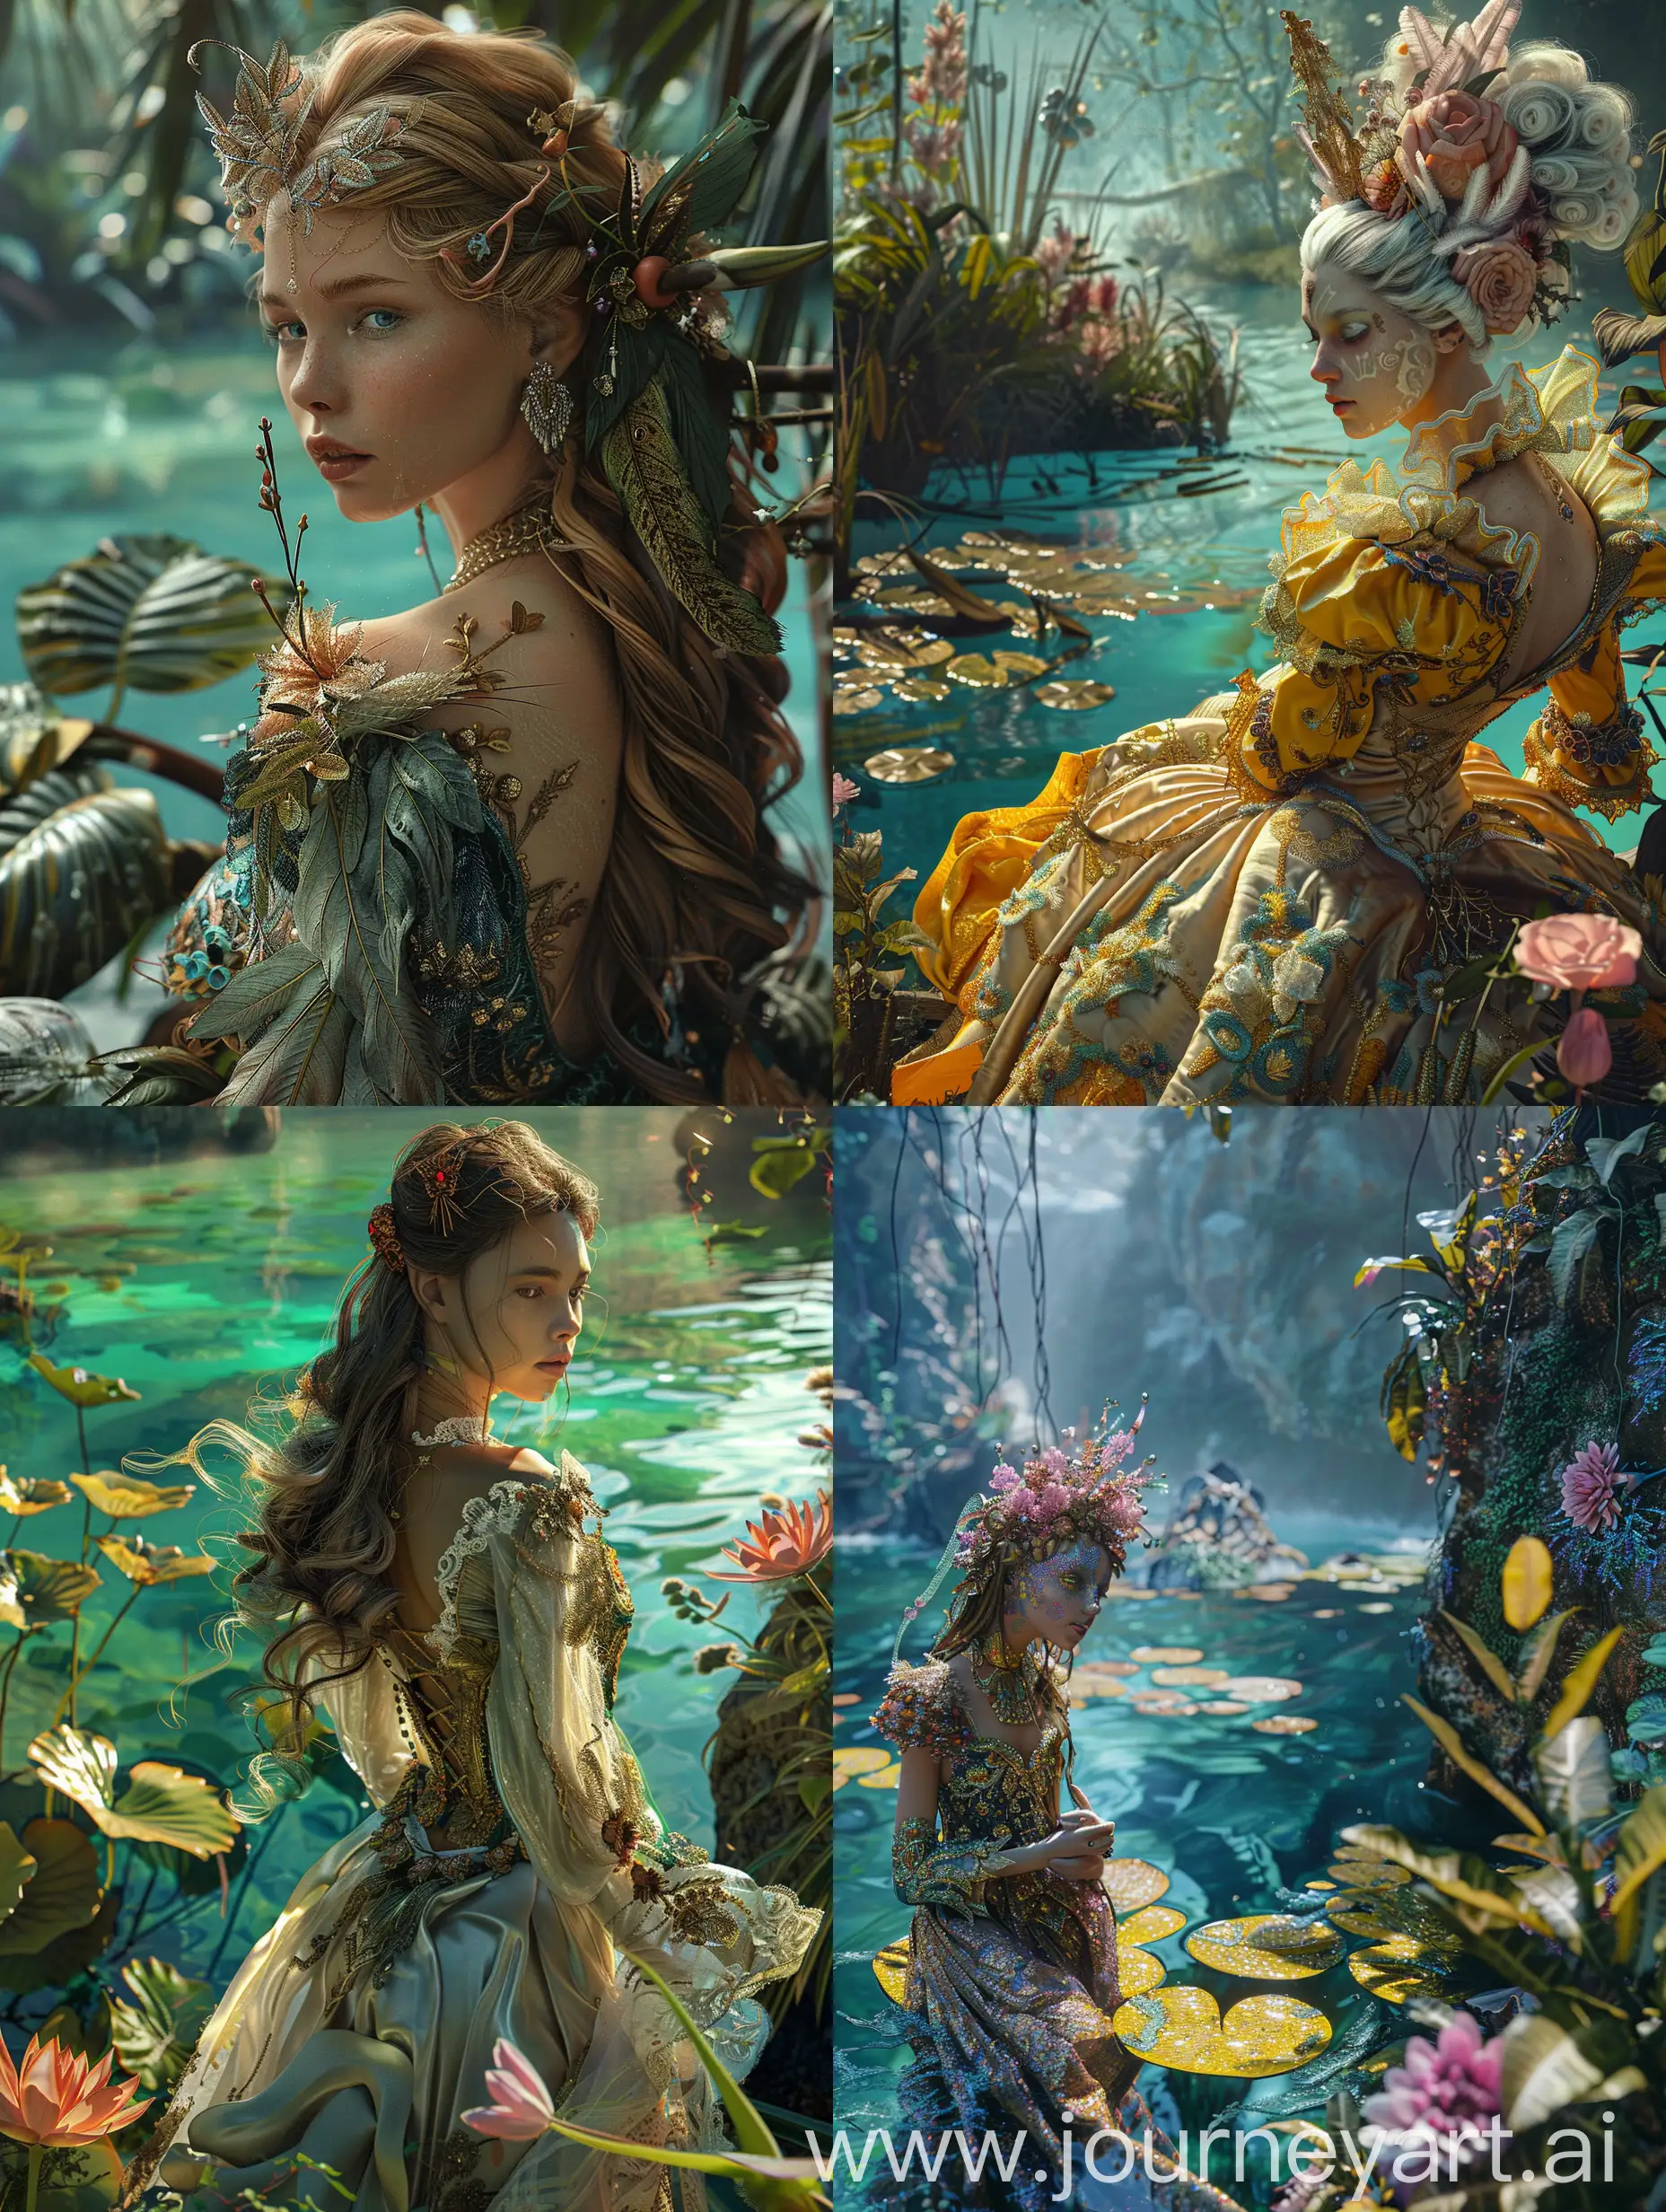 Magical-Elf-Lady-in-Baroque-Clothes-by-an-Aquamarine-River-with-Exotic-Plants-and-Giant-Flowers